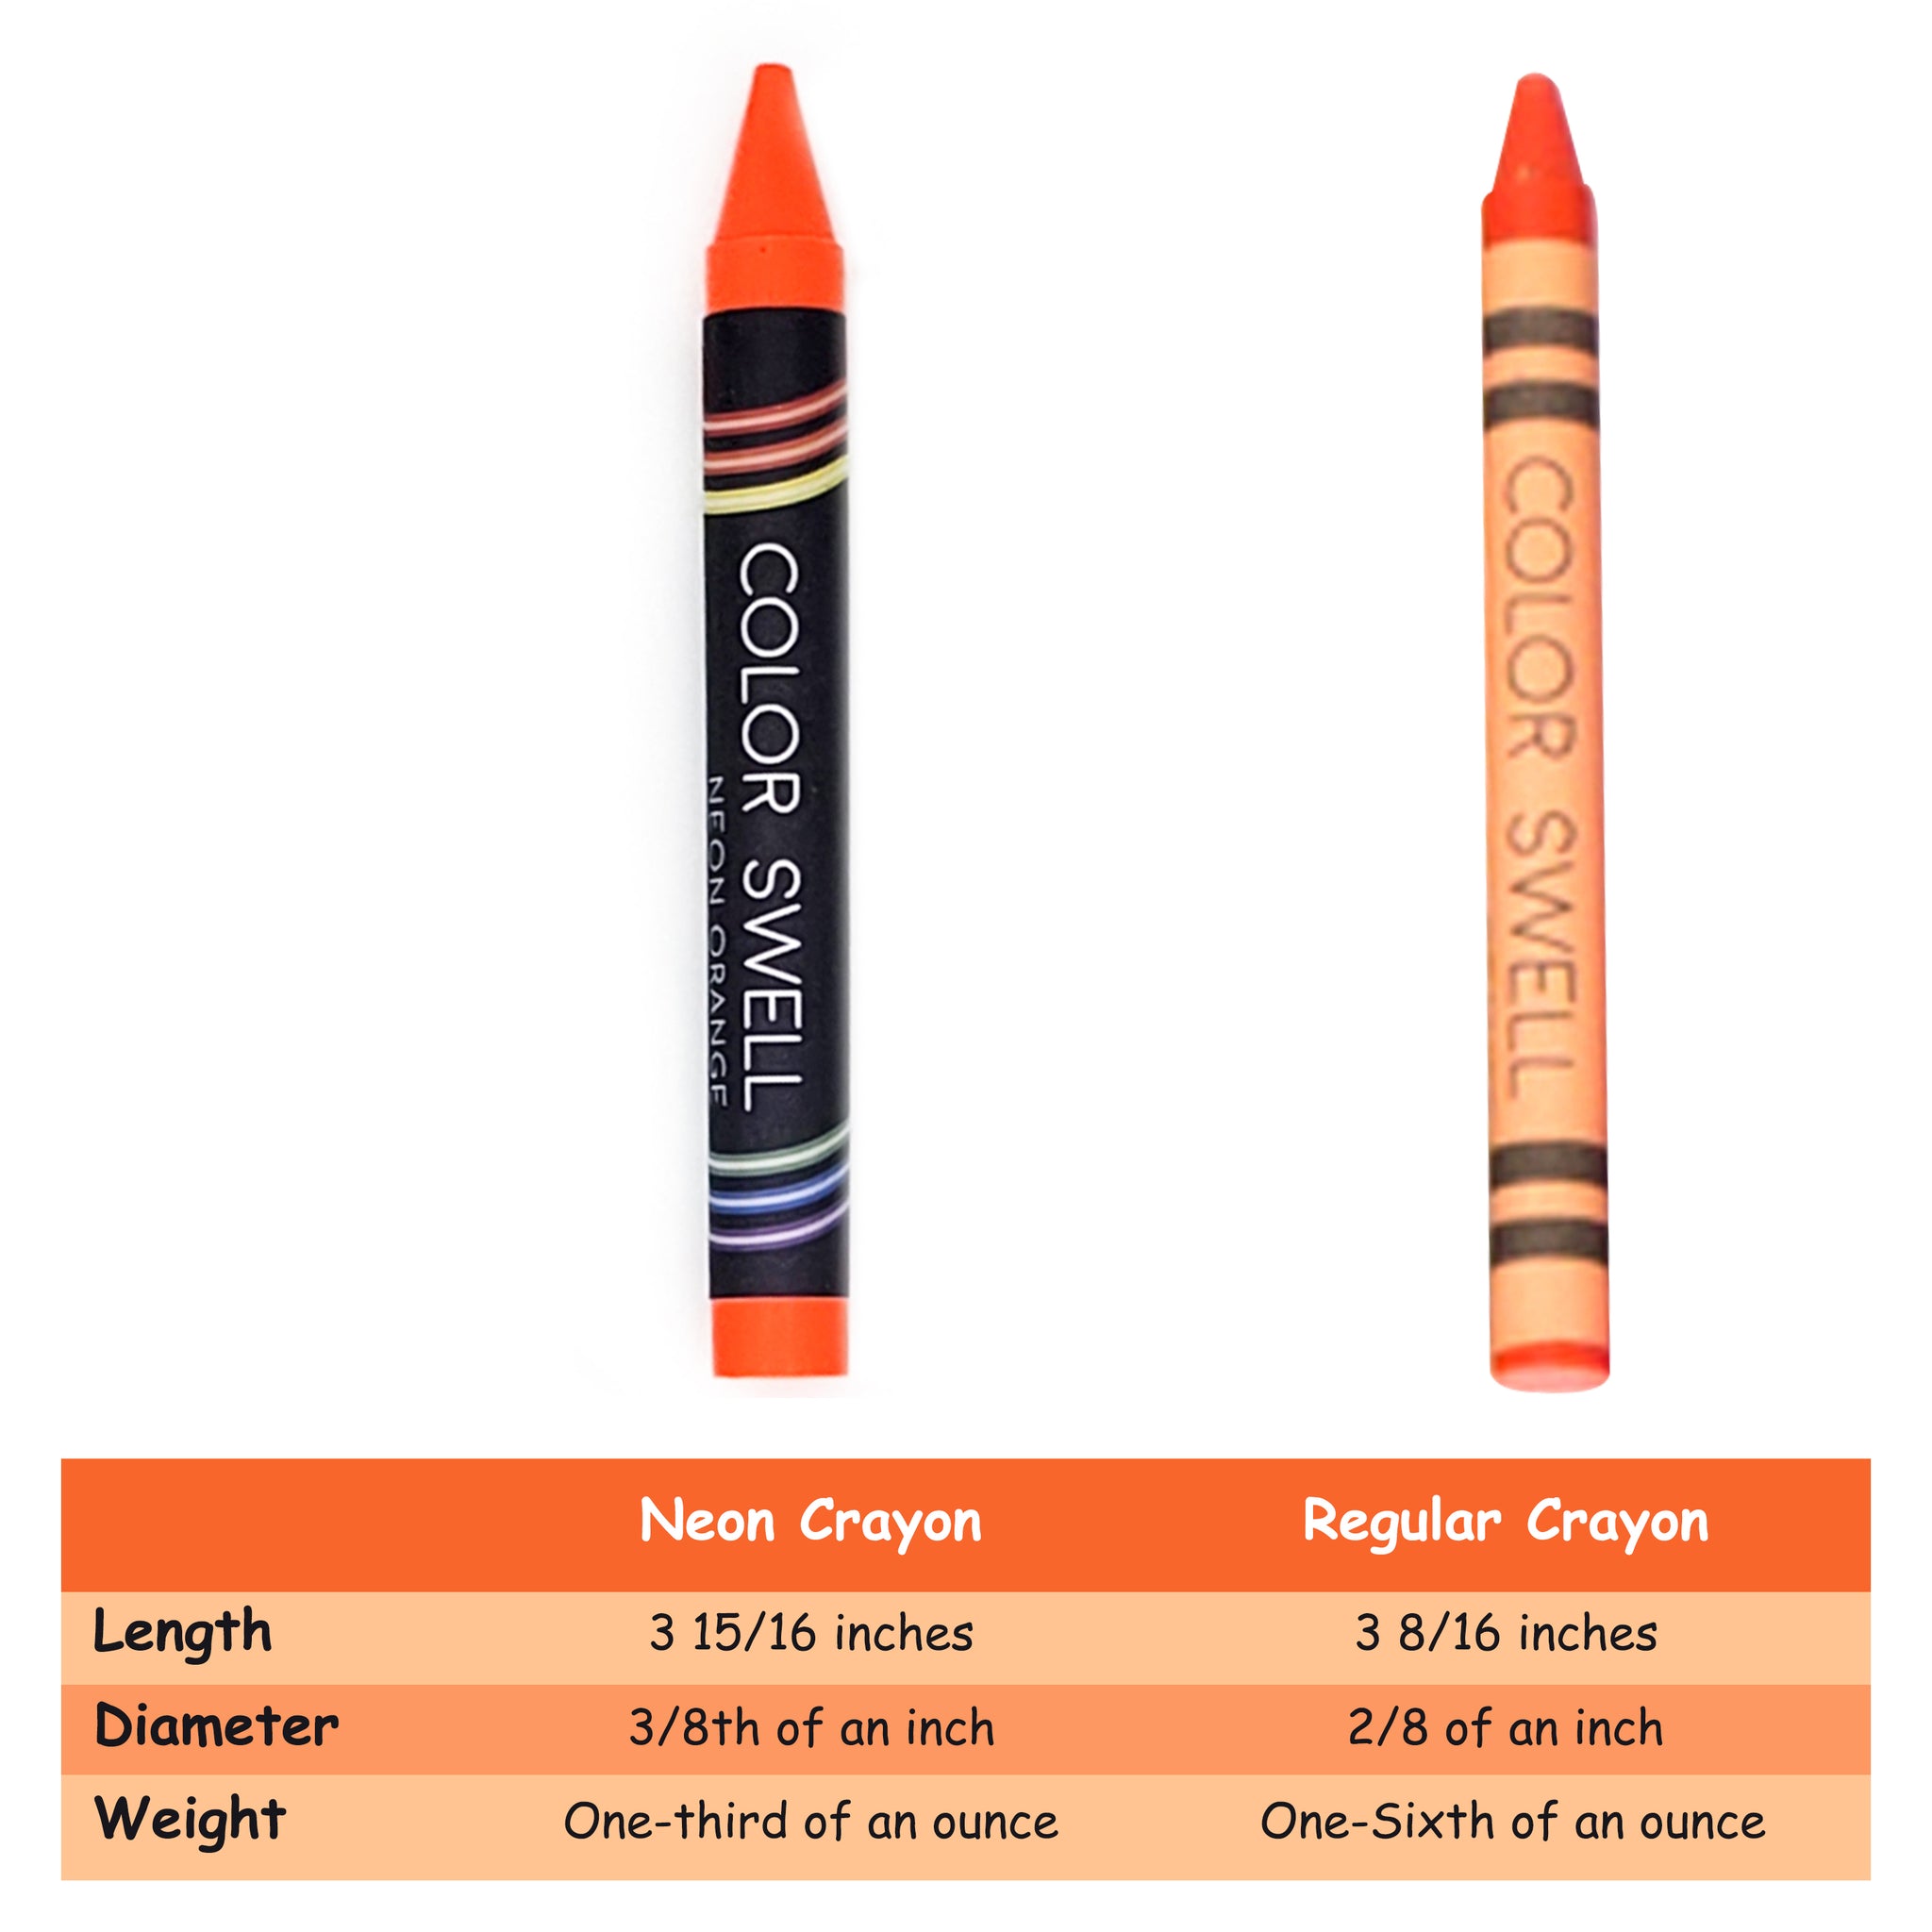 a visual comparison of the Crayola 24 pack against my proposed pack. #, crayola